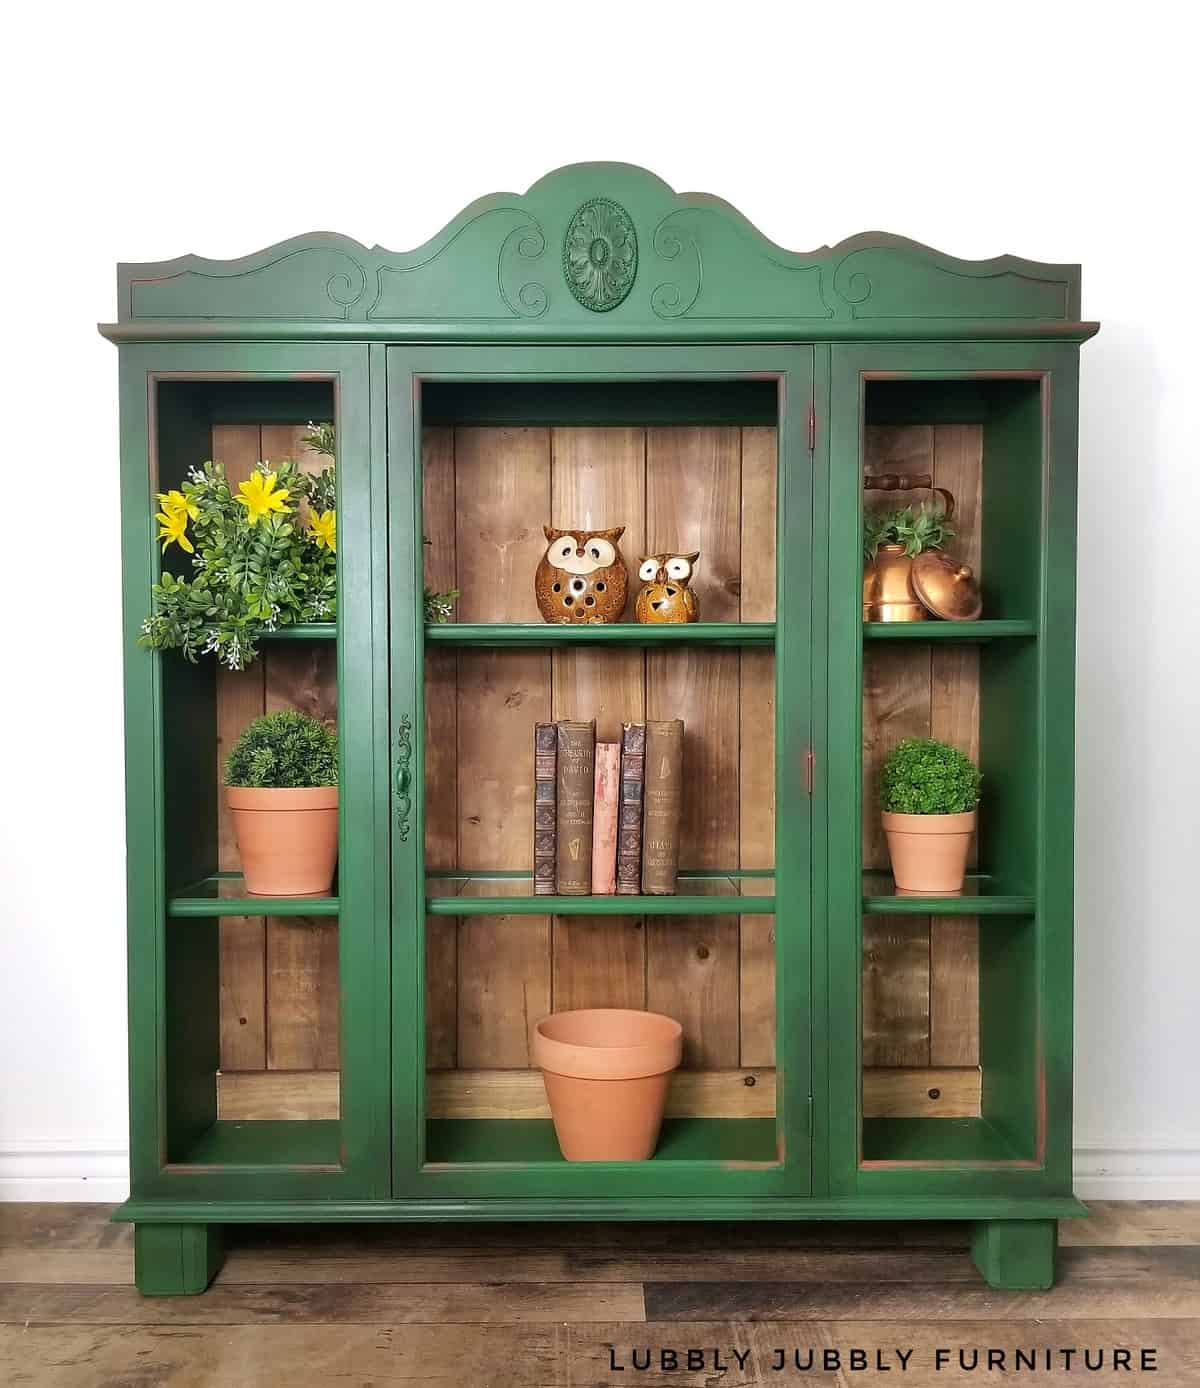 Rustic green storage cabinet with wood panelling and emerald green painted doors